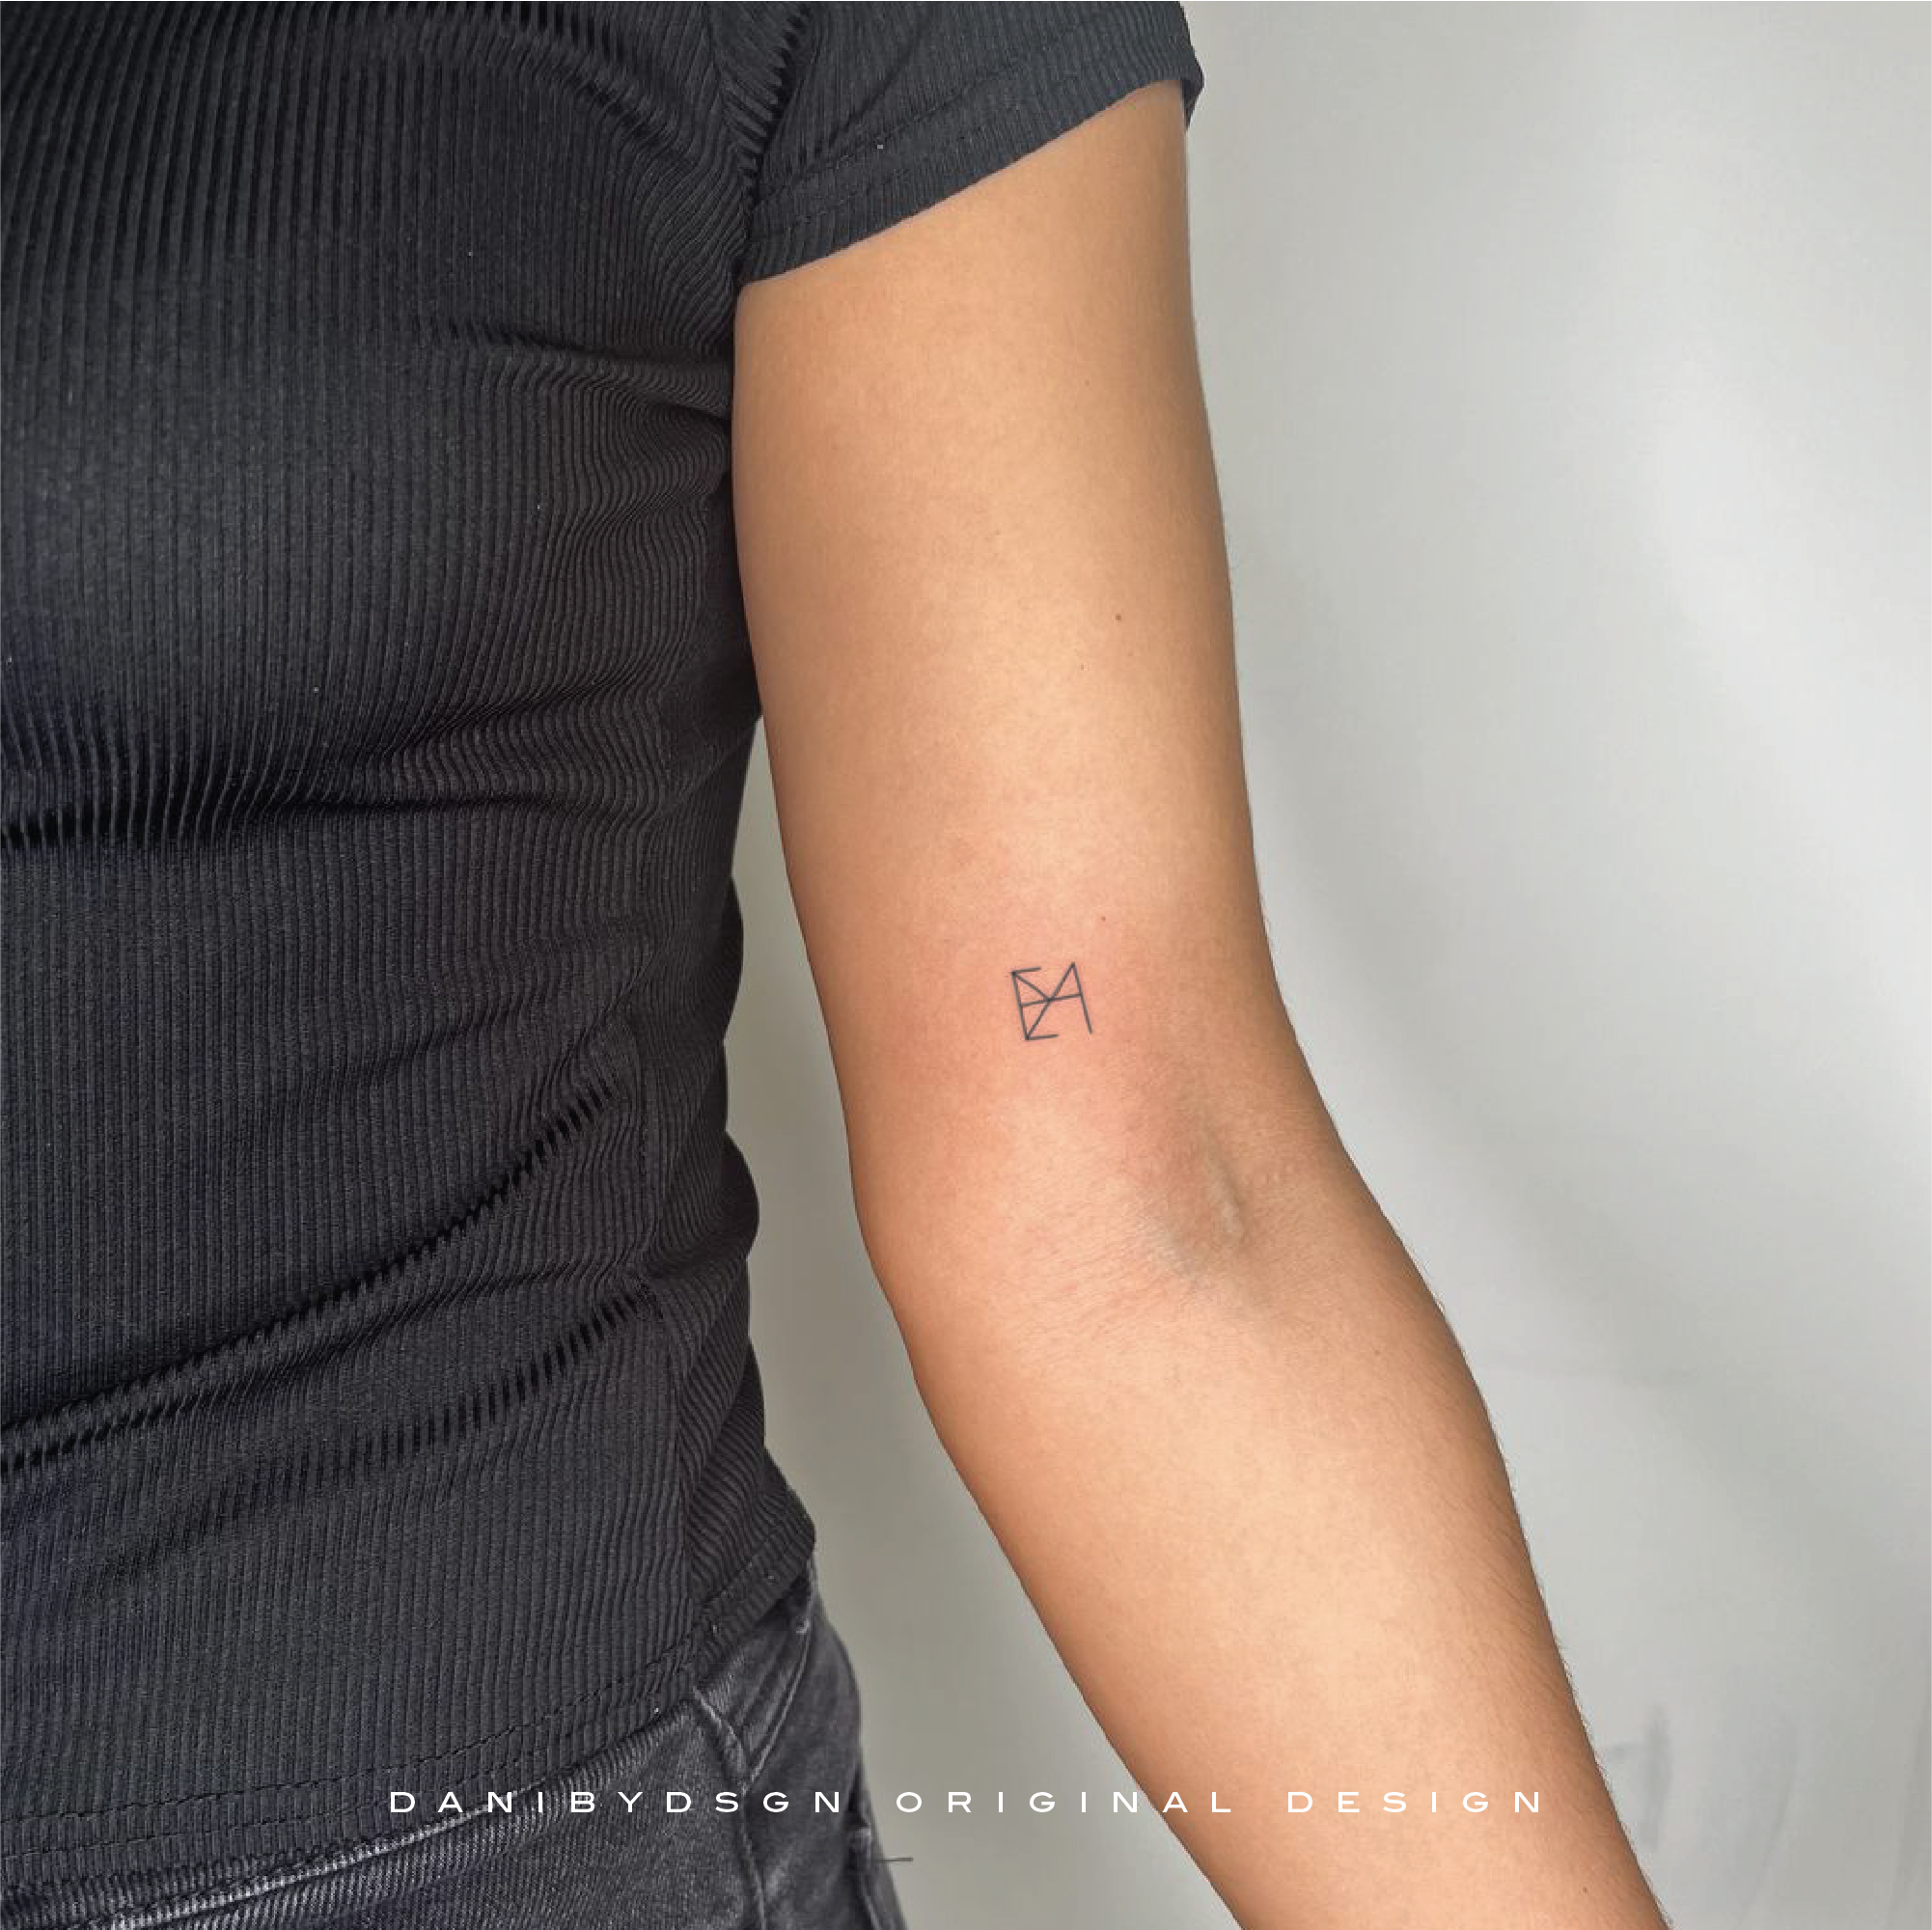 A delicate fine line tattoo design featuring a customized monogram with interlocking letters and intricate details